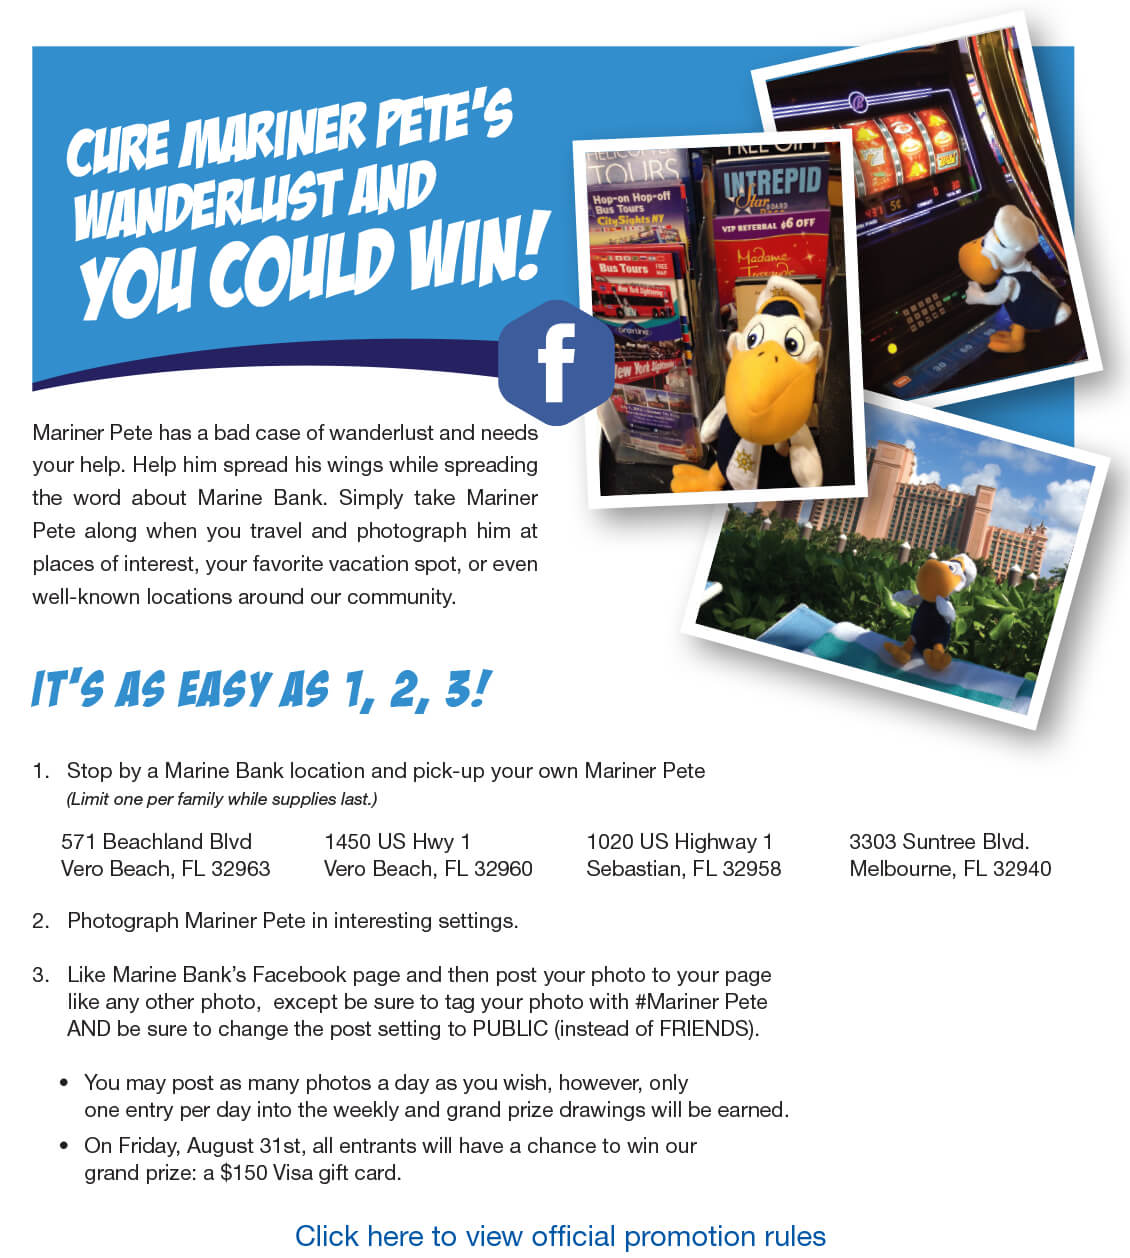 Mariner Pete has a bad case of wanderlust and needs your help. Help him spread his wings while spreading the word about Marine Bank. Simply take Mariner Pete along when you travel and photograph him at places of interest, your favorite vacation spot, or even well-known locations around our community.

1.	Stop by a Marine Bank location and pick-up your own Mariner Pete
	(Limit one per family while supplies last.)

571 Beachland Blvd 
Vero Beach, FL 32963 


1450 US Hwy 1 
Vero Beach, FL 32960


1020 US Highway 1
Sebastian, FL 32958 


3303 Suntree Blvd.
Melbourne, FL 32940

2.	Photograph Mariner Pete in interesting settings.

3.	Like Marine Bank’s Facebook page and then post your photo to your page
      like any other photo,  except be sure to tag your photo with #Mariner Pete 
	AND be sure to change the post setting to PUBLIC (instead of FRIENDS).

You may post as many photos a day as you wish, however, only
one entry per day into the weekly and grand prize drawings will be earned.
On Friday, August 31st, all entrants will have a chance to win our
grand prize: a $150 Visa gift card.


Click here to view official promotion rules




